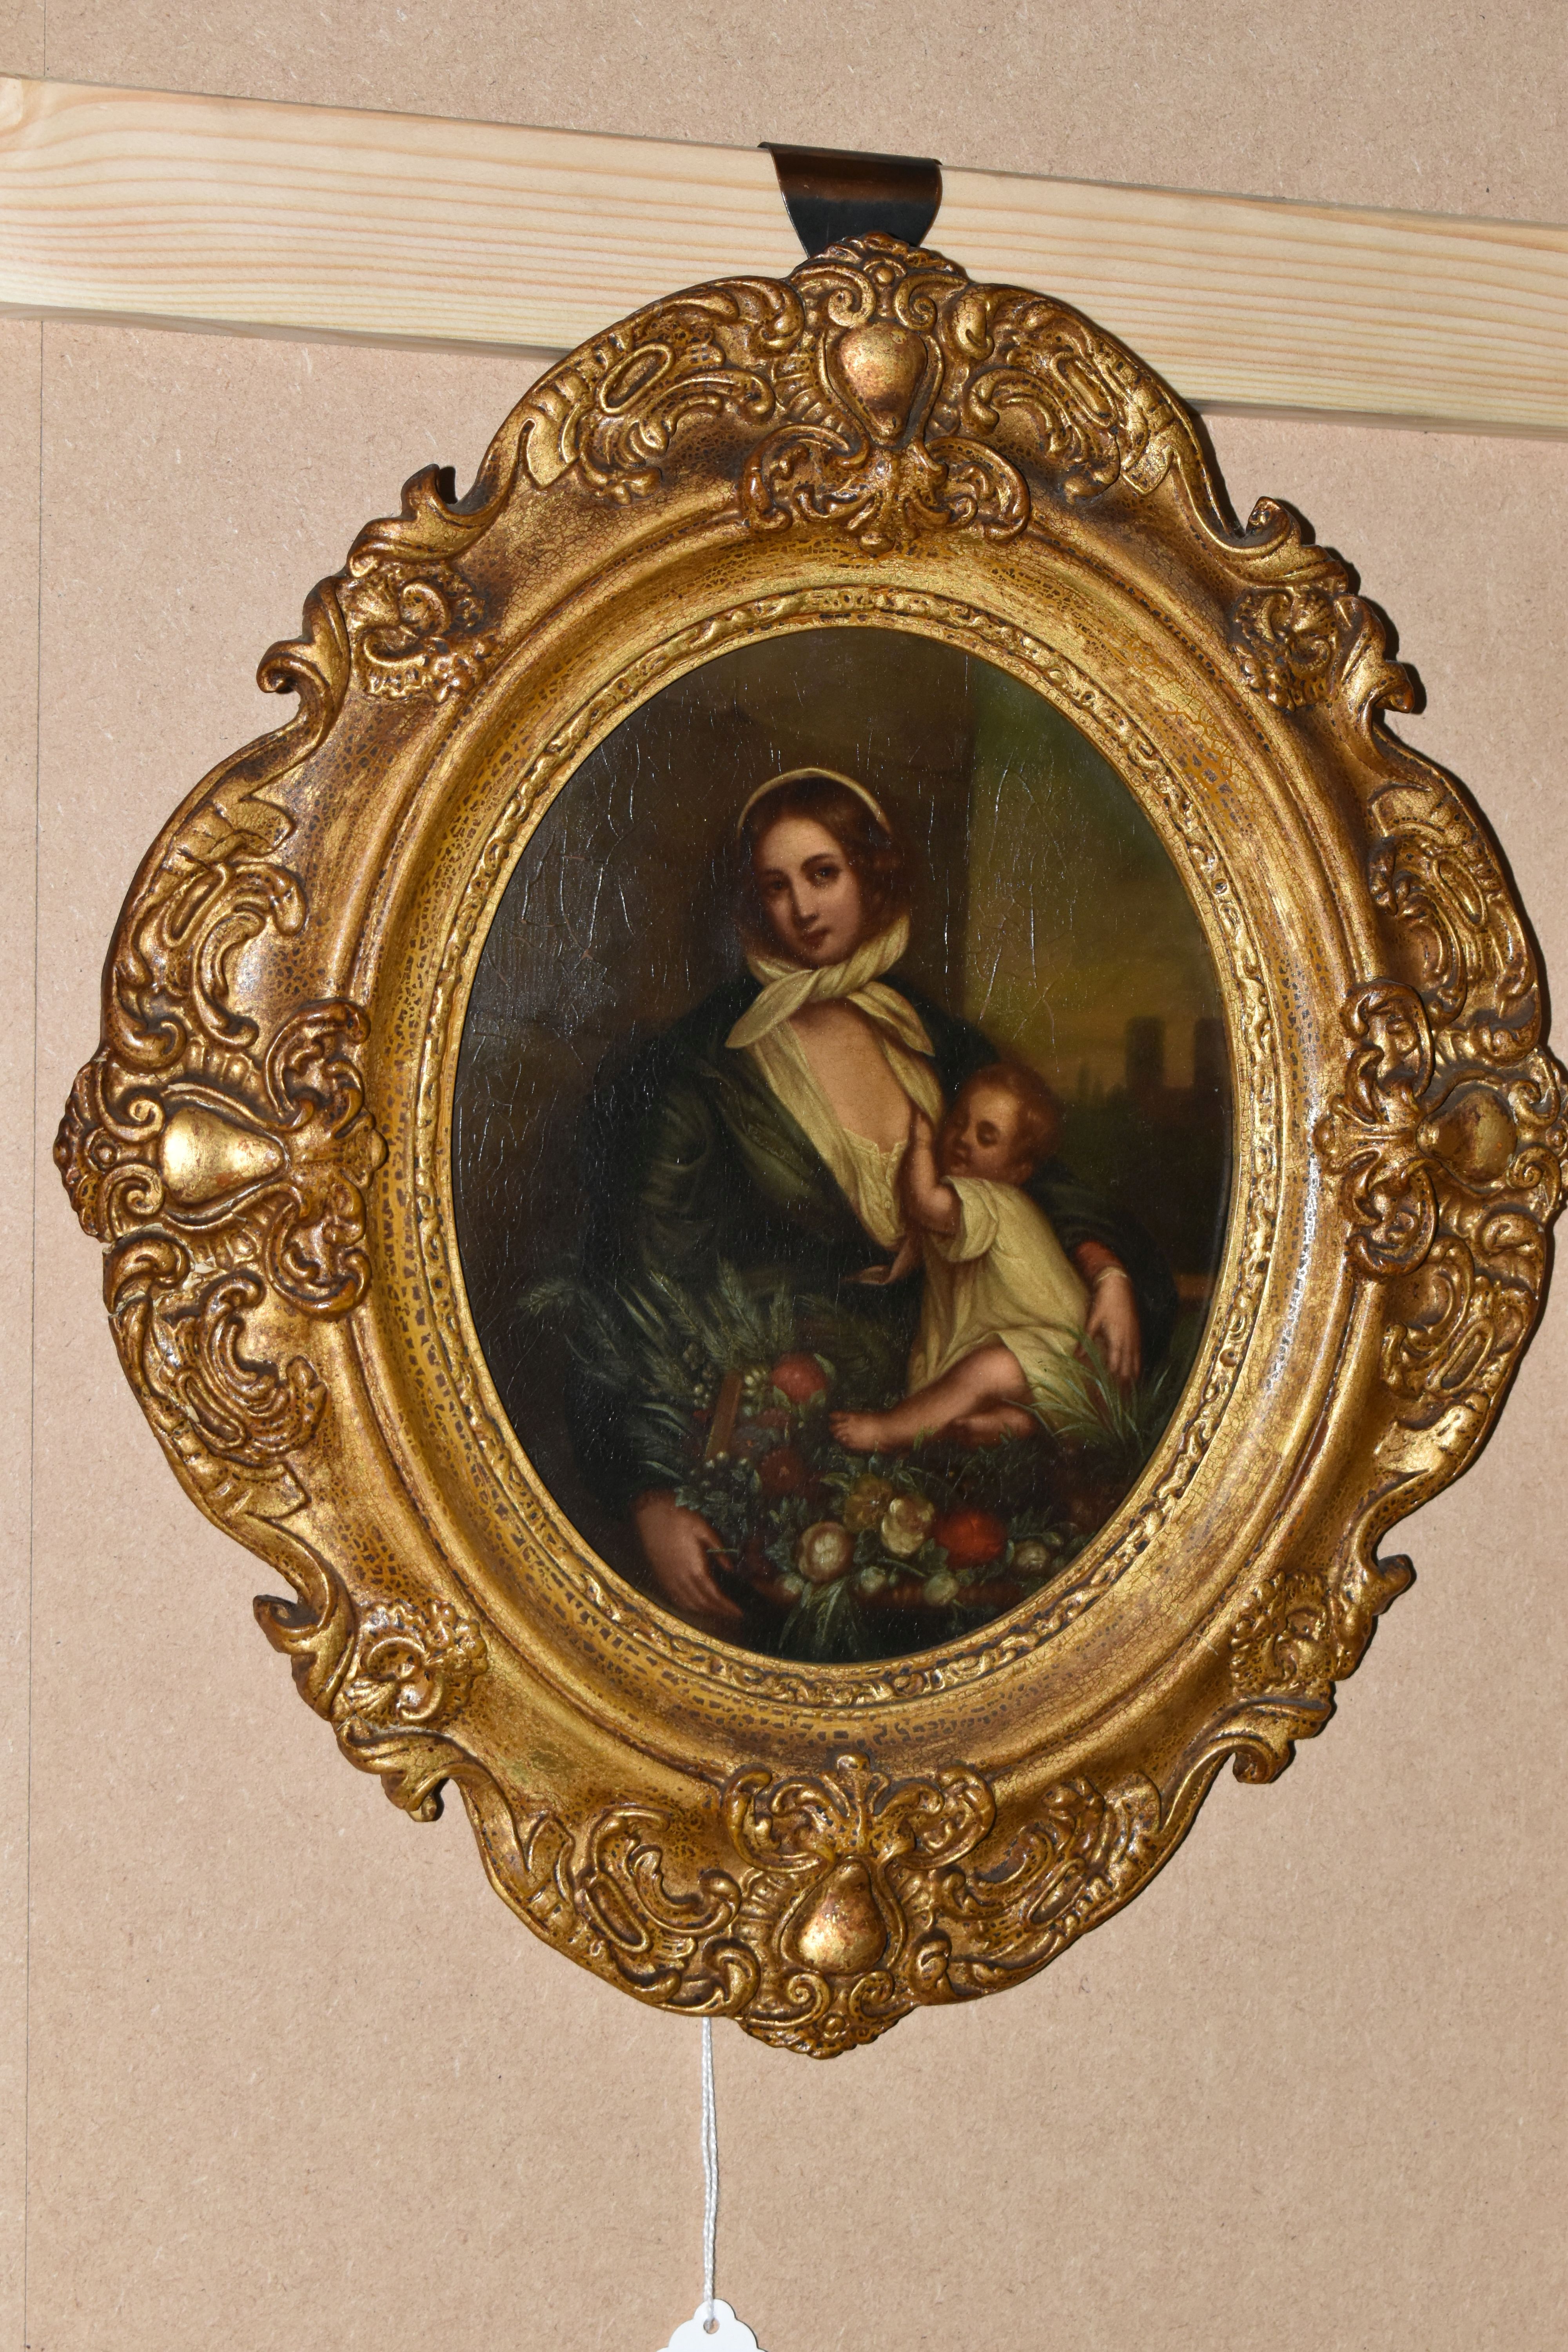 A 19TH CENTURY ENGLISH SCHOOL PORTRAIT OF MOTHER AND CHILD, the mother is depicted as a flower